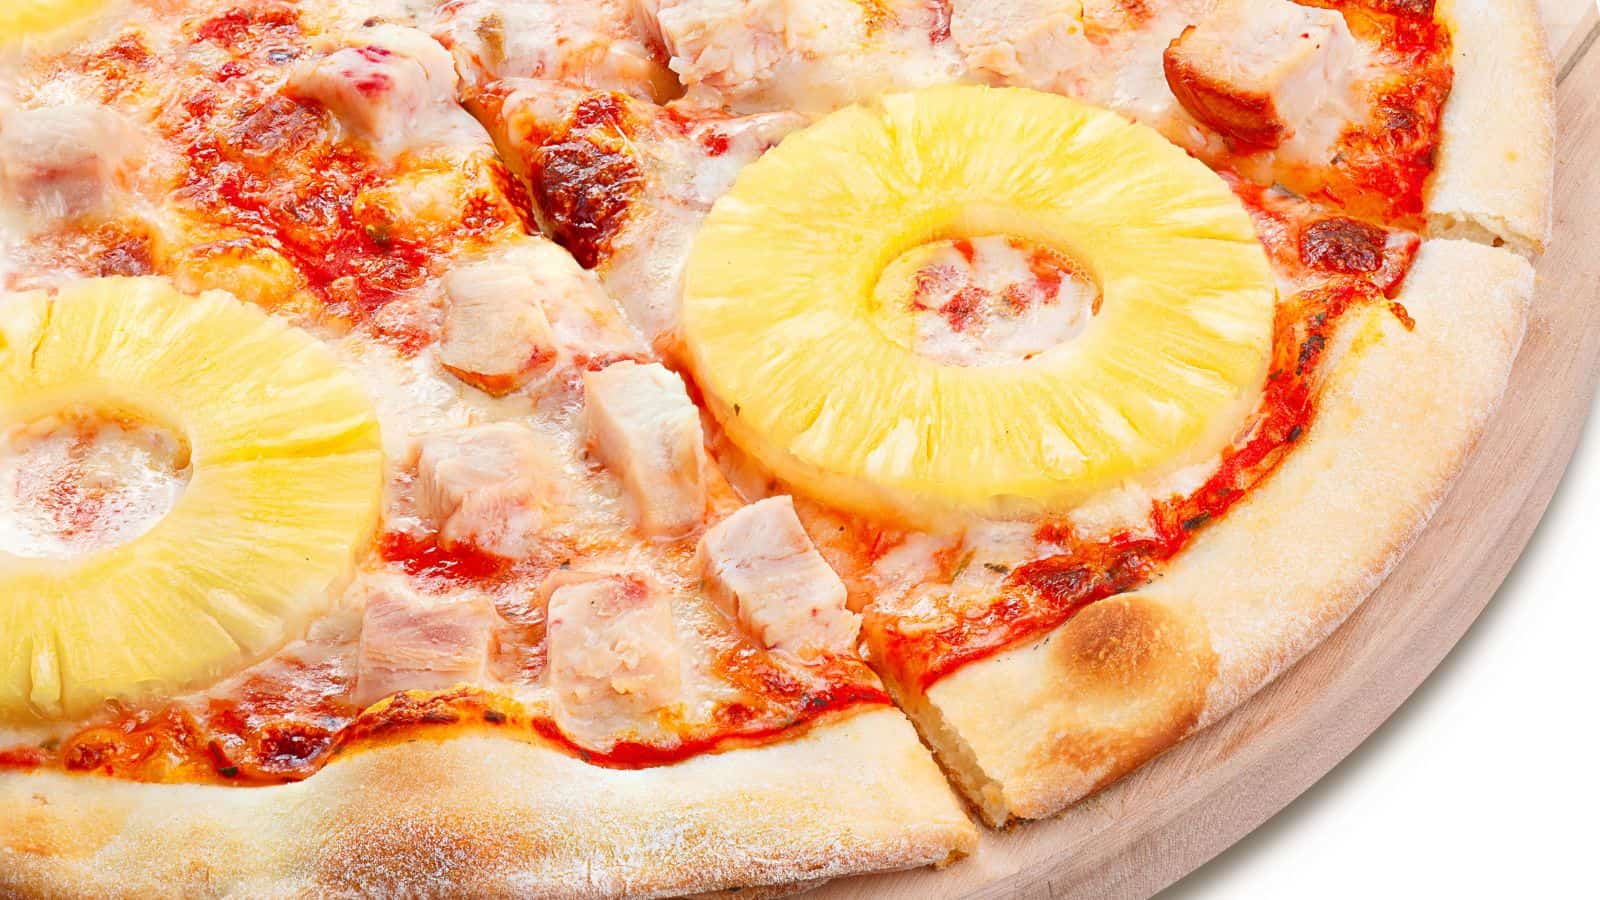 Close-up of pizza with pineapple slices on top.